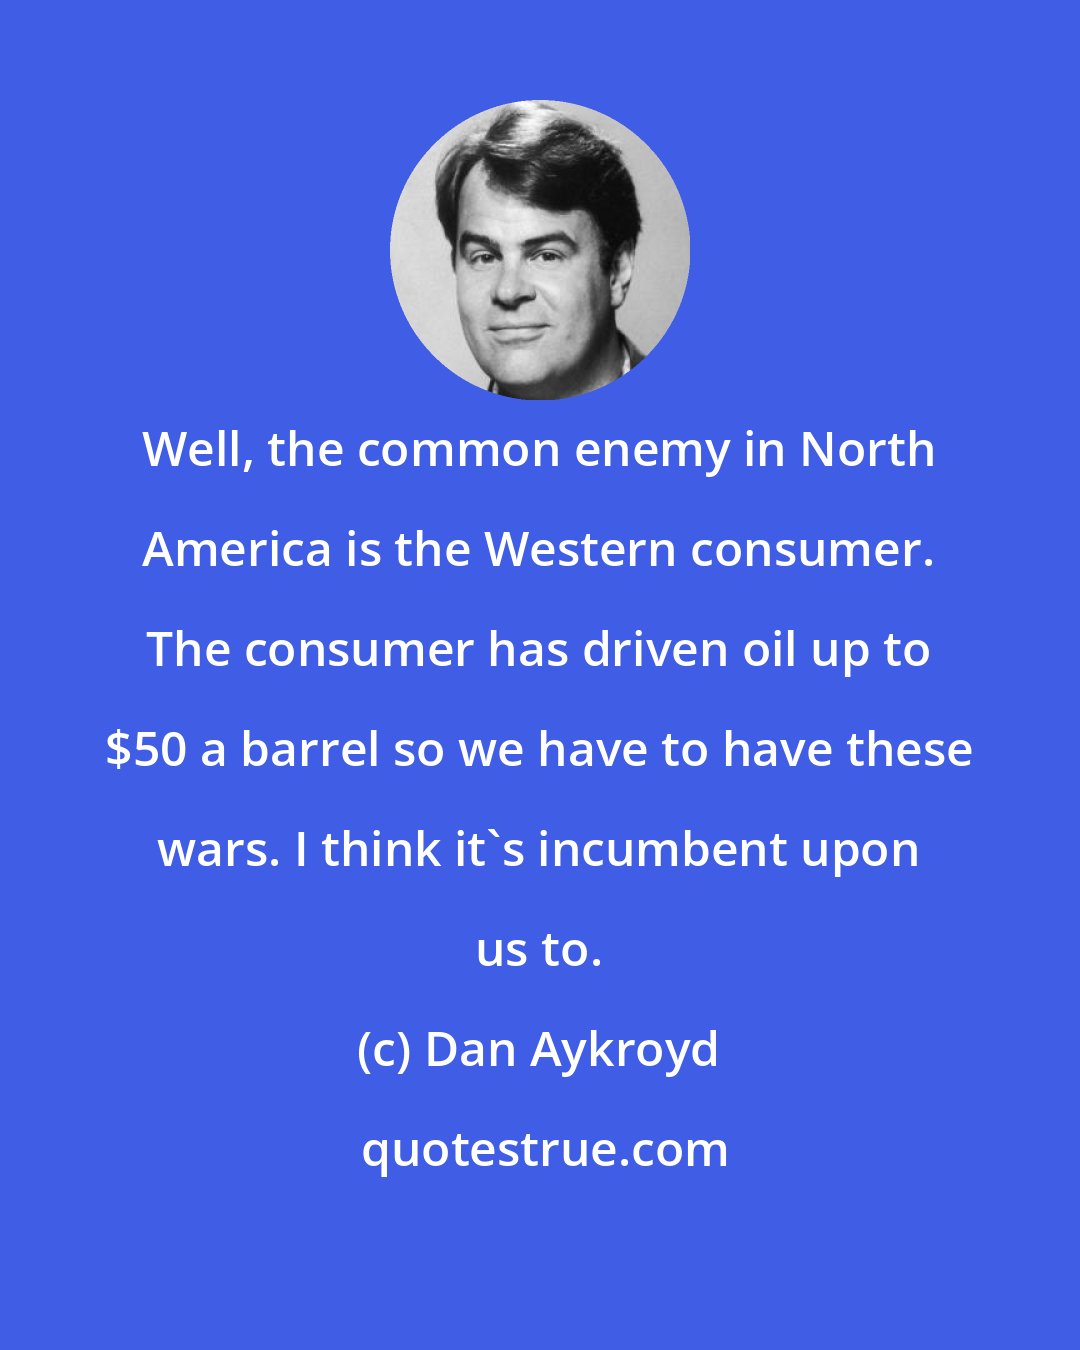 Dan Aykroyd: Well, the common enemy in North America is the Western consumer. The consumer has driven oil up to $50 a barrel so we have to have these wars. I think it's incumbent upon us to.